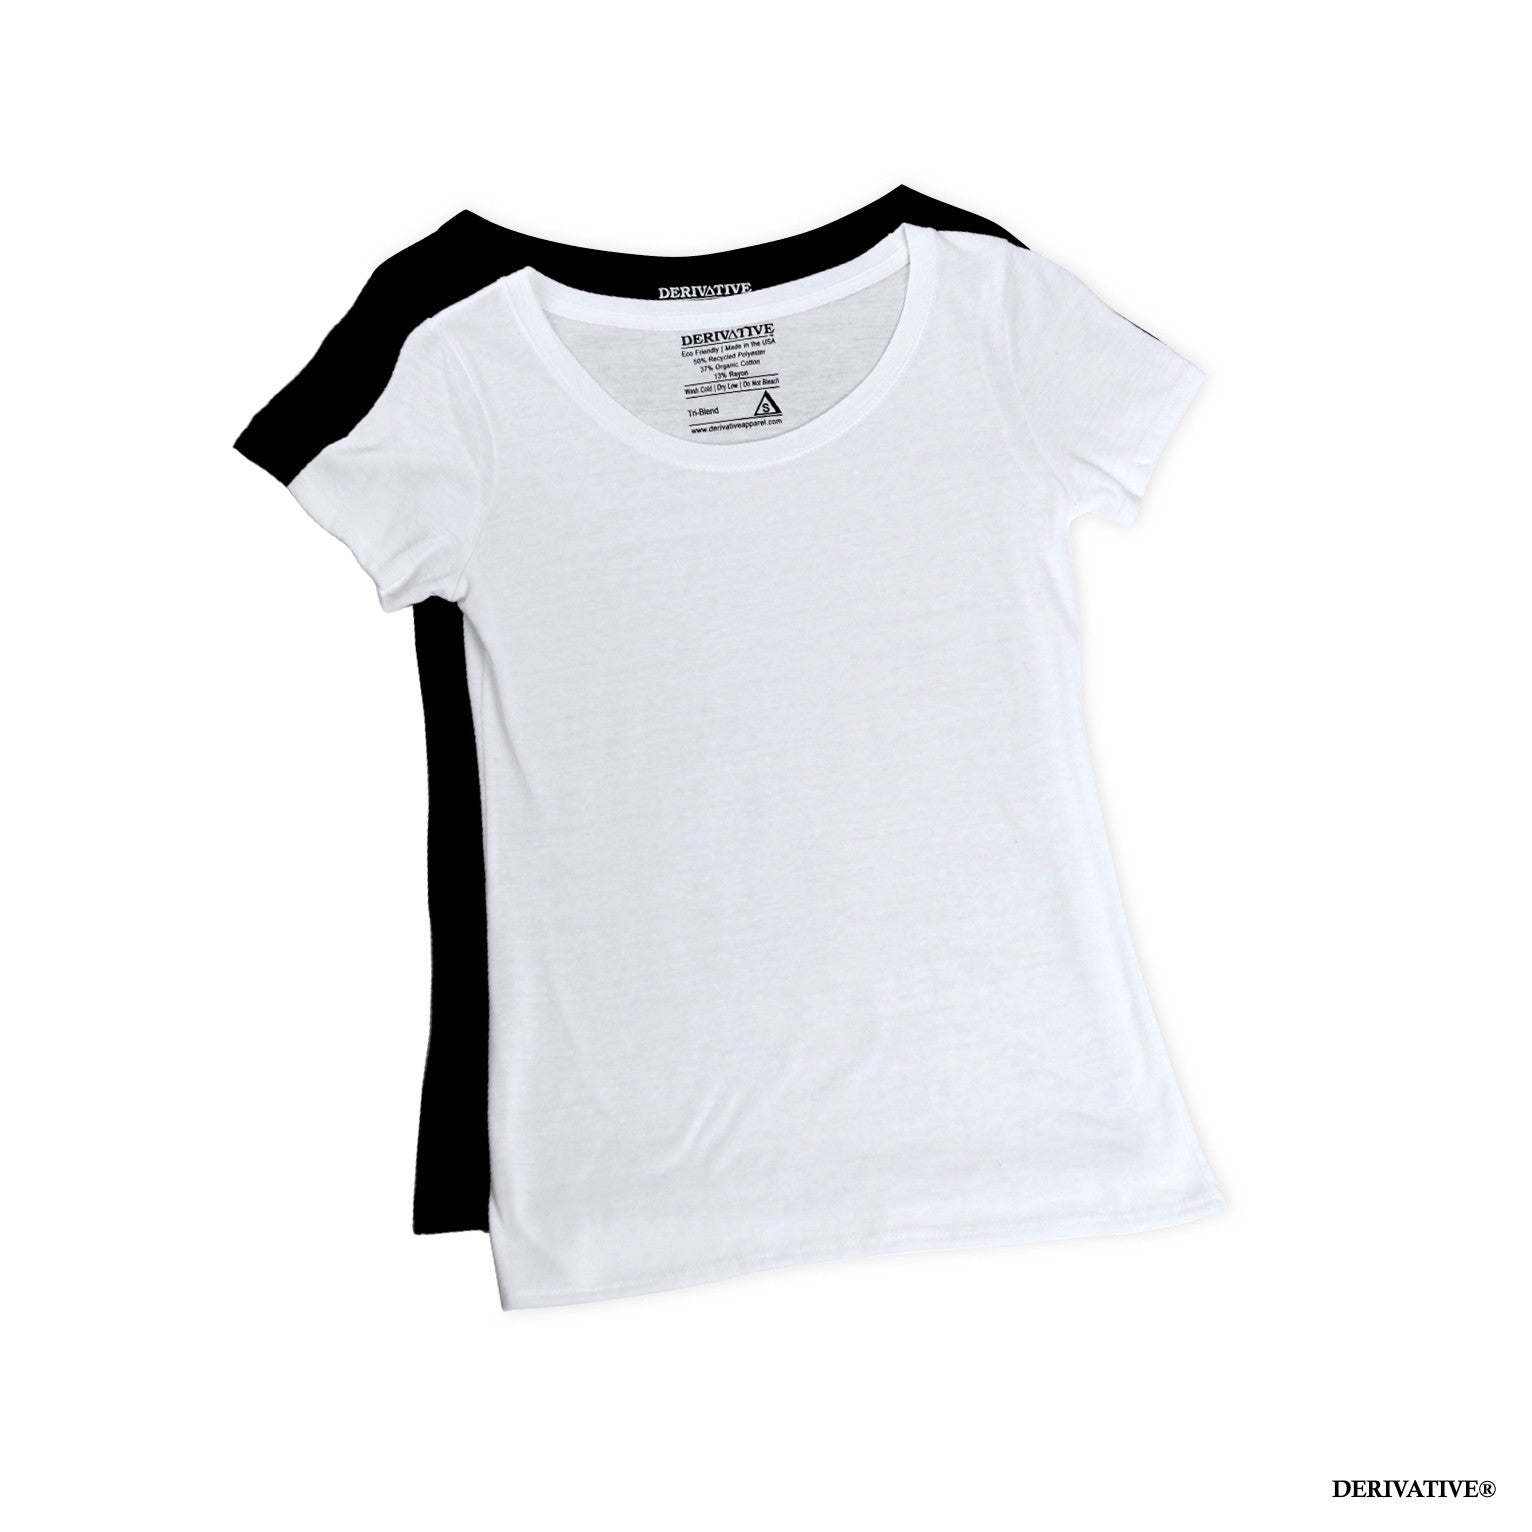 soft comfortable womens eco friendly scoop neck t shirts made from organic cotton & recycled materials